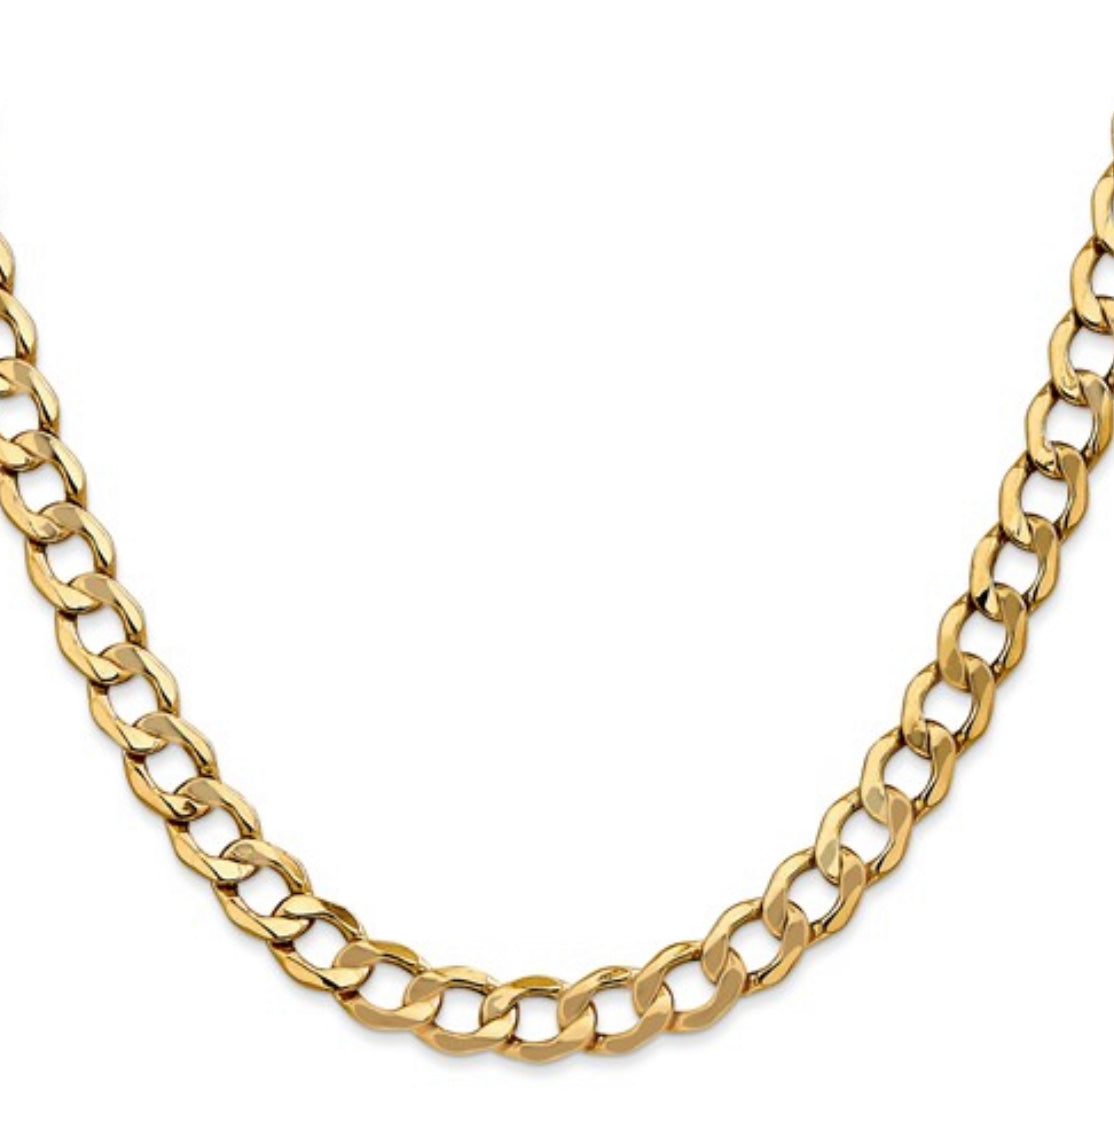 10K Yellow Gold Semi-Solid Curb Link Chain - 5.25mm